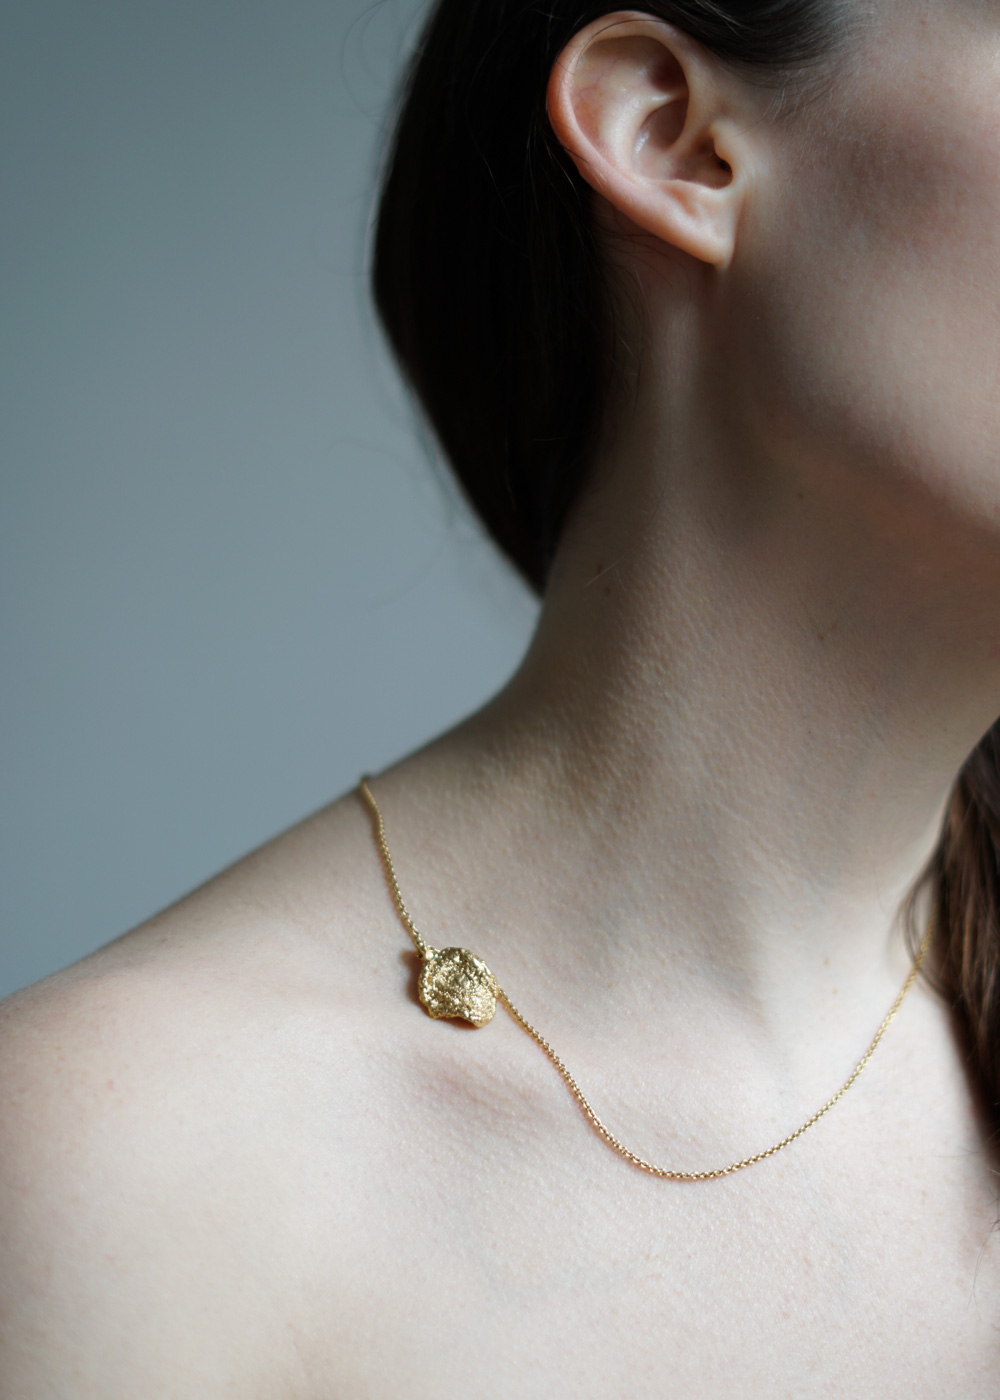 Atlas krig Vejrtrækning Jewelry That Tells a Story ~ Slowly Crafted by Maria Sørensen — RG Daily